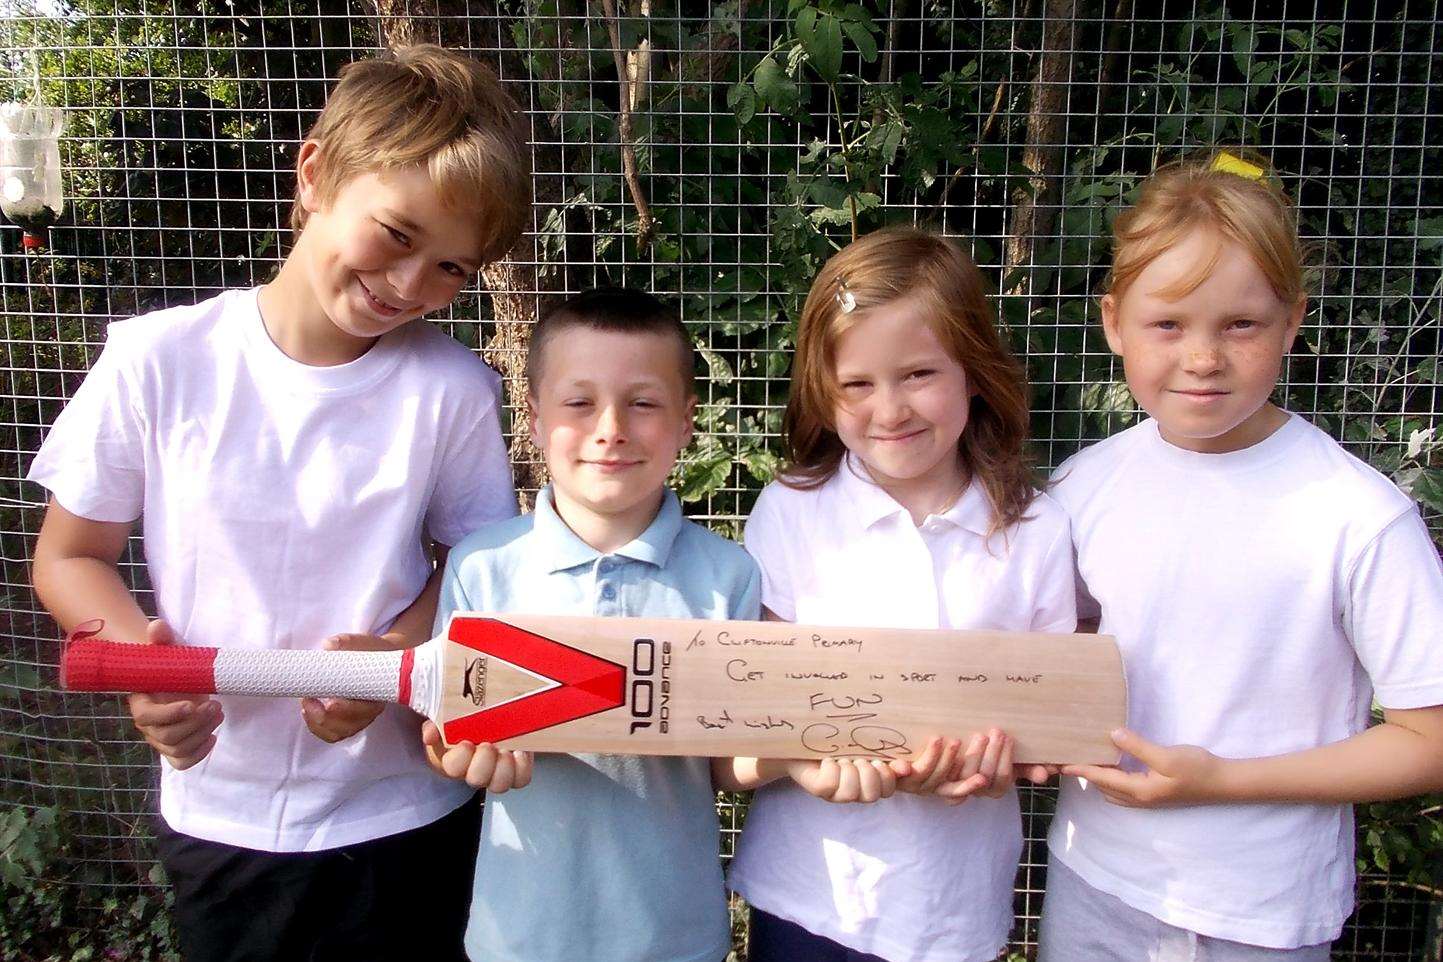 Proud youngsters show off the signed cricket bat donated to Cliftonville Primary School by their VIP visitor and top sports star Geraint Jones.